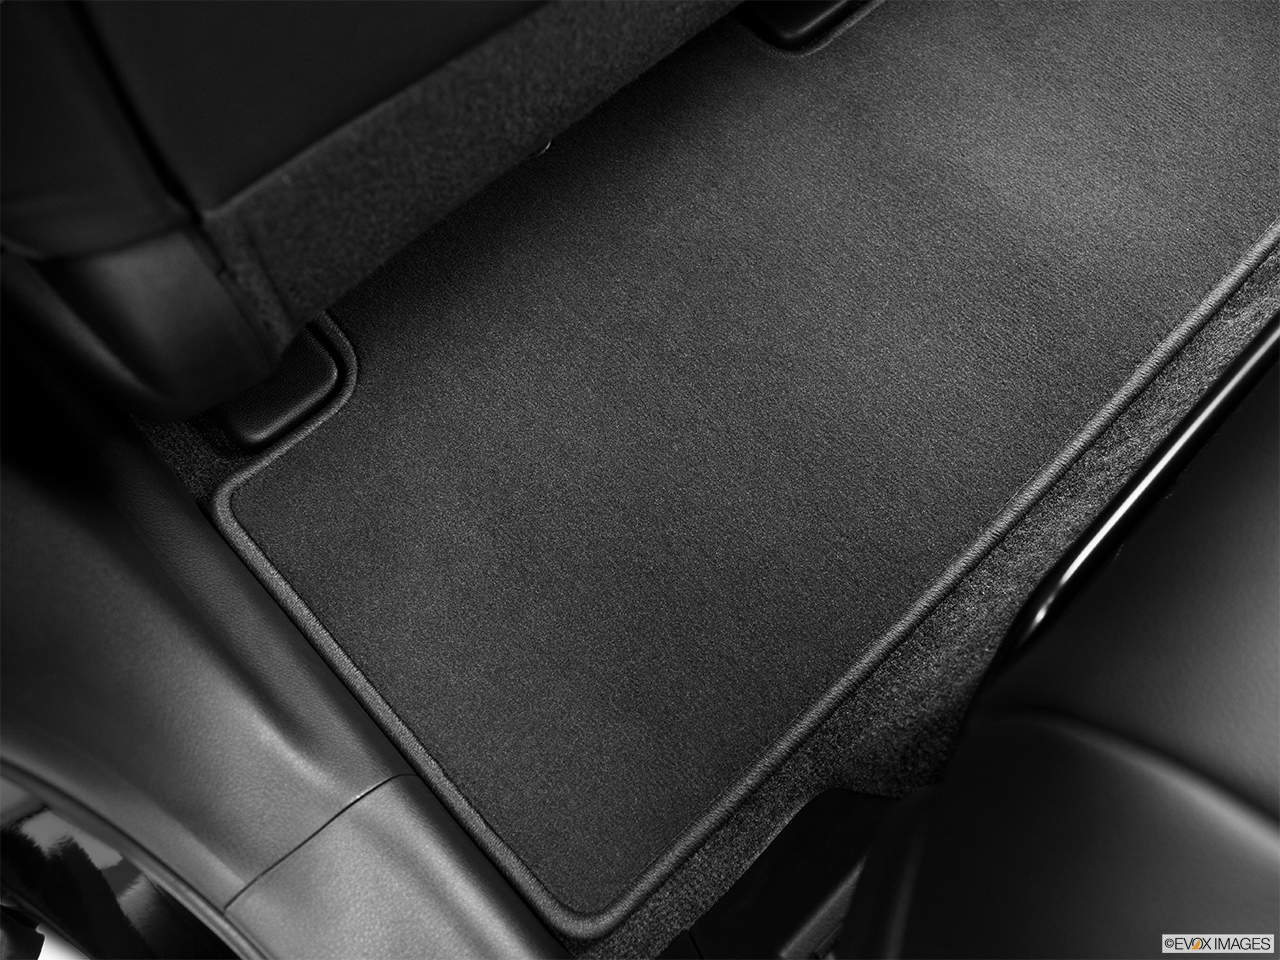 2014 Acura MDX Base Rear driver's side floor mat. Mid-seat level from outside looking in. 